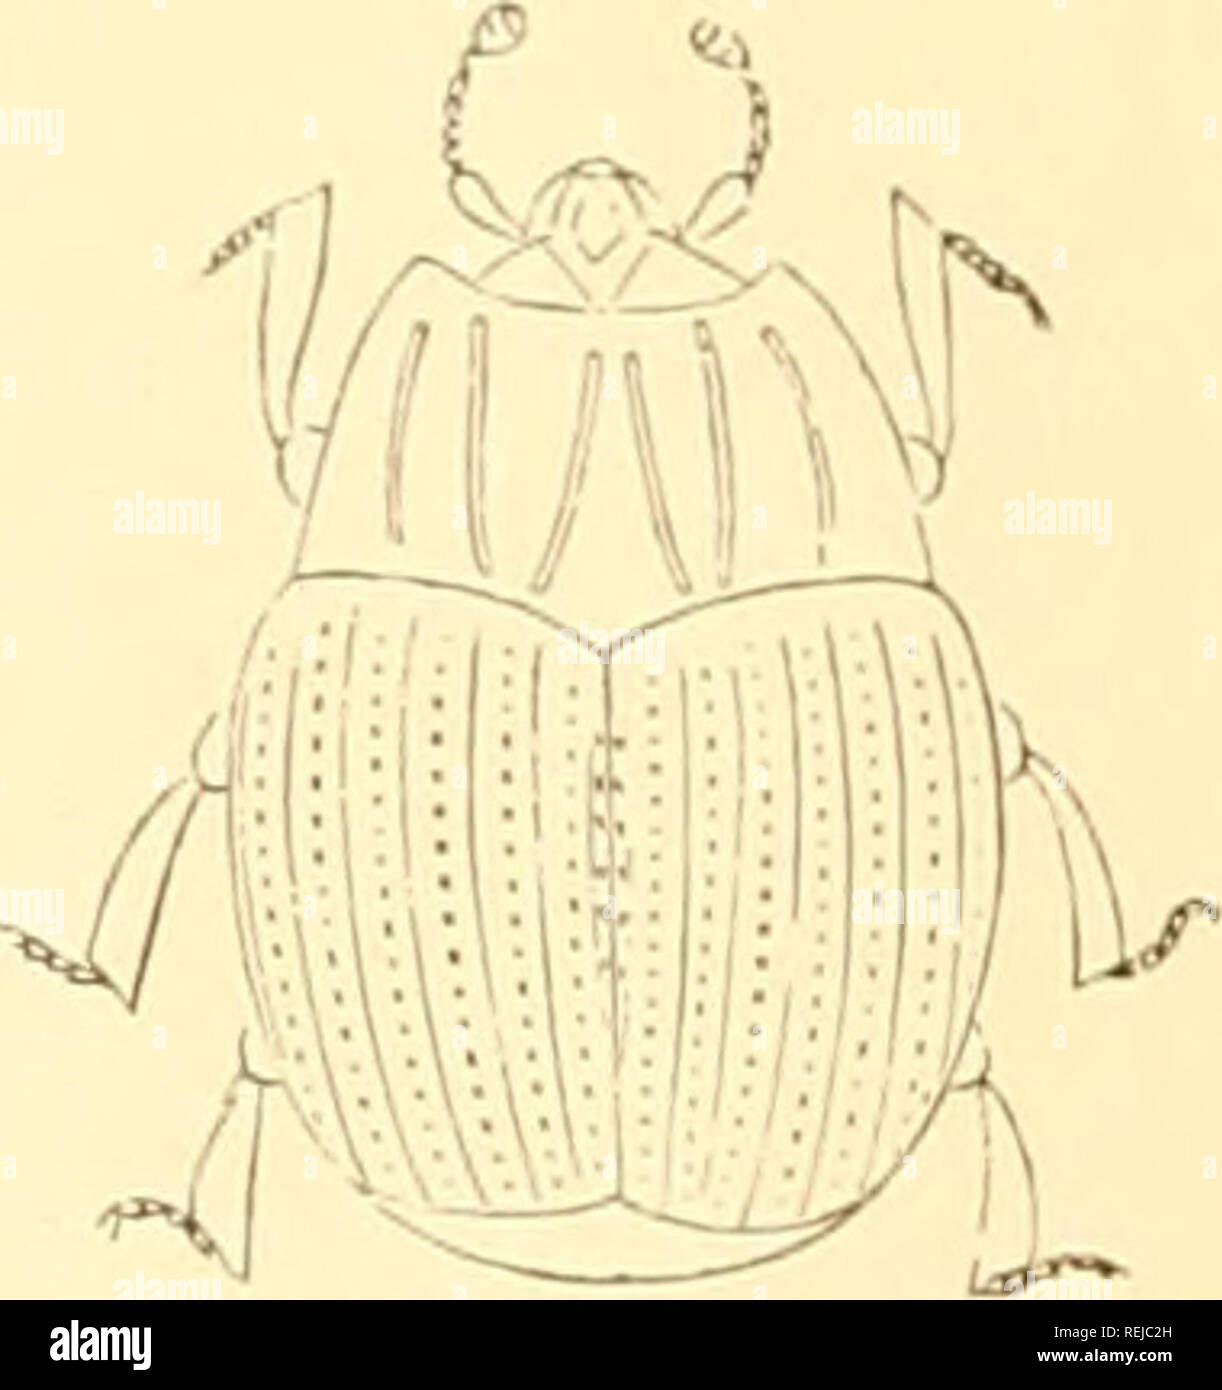 . Coleoptera. Beetles. Fill. 447. — //istvr n.iriiutai. Fig. 448. — Histt r bimacuhitus. FiG. 449. — Onfhrophilus atterjiatus. tidulidre in having geniculate antenna'. Most of the Histerida? are black, a few liave red spots, and a small number are metallic in coloration; all their tibia? are usually dilated ; the elytra are truncate behind, leaving two abdominal segments exposed ; the upper surface is striate, tlie position and naiure of the striiB being generally of value as specific characters. The larva? of the Histerid;e are elongated, with corneous head and prothorax, .and have no ocelli. Stock Photo